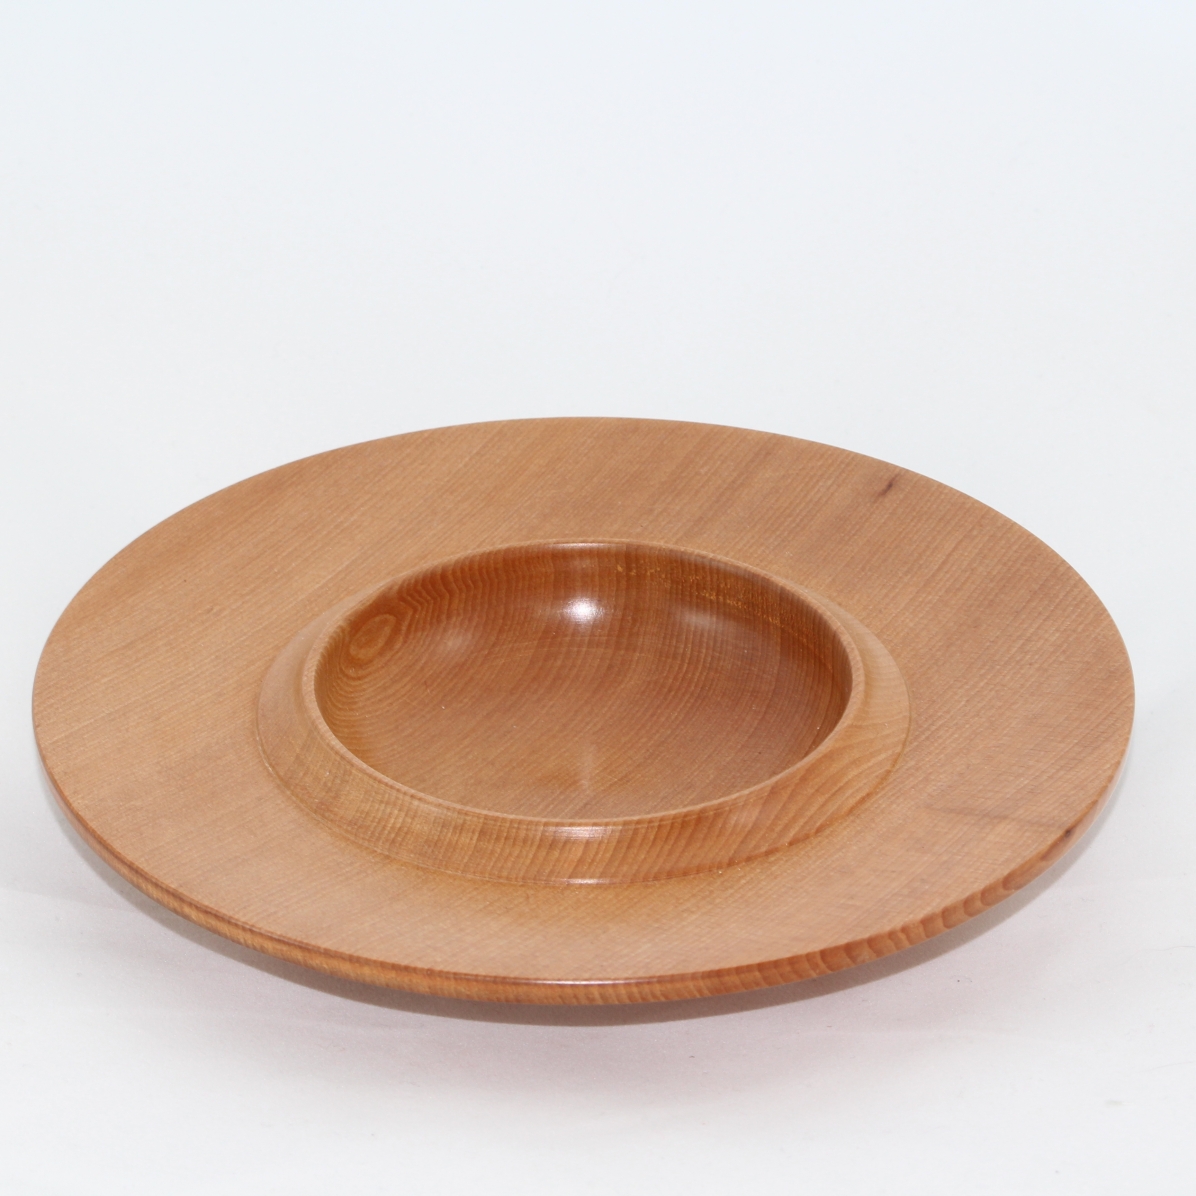 Bowls by Mauritz